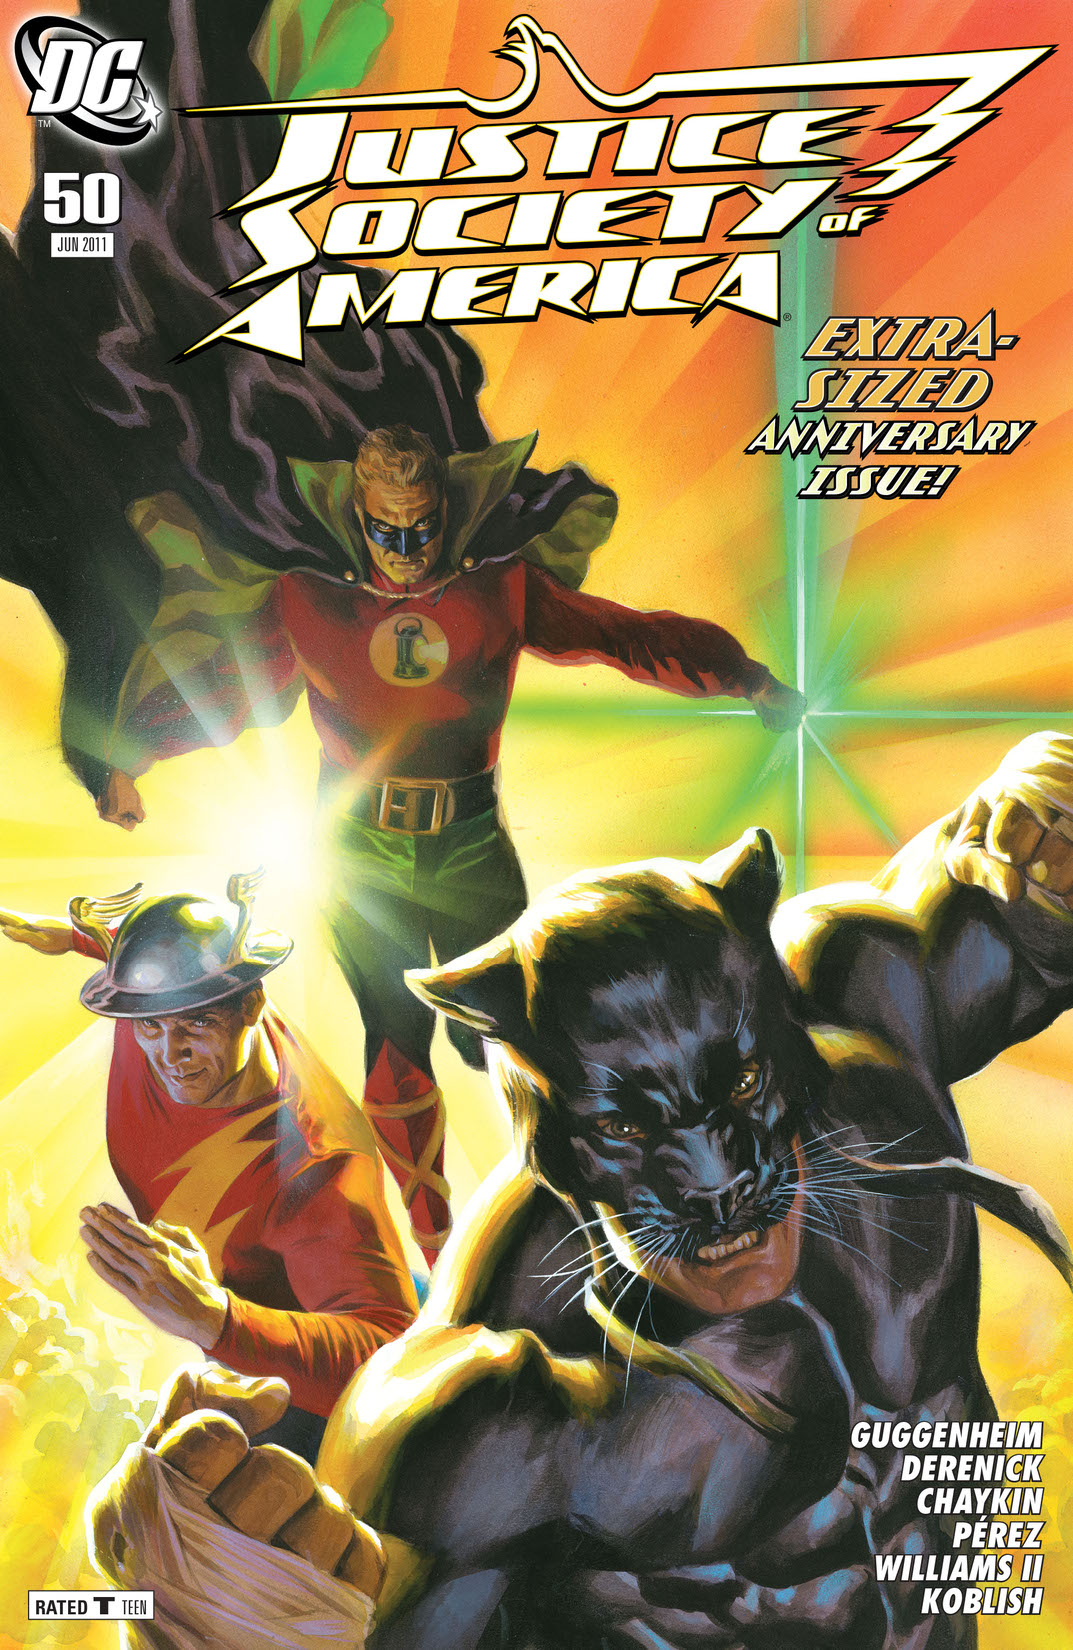 Justice Society of America (2006-) #50 preview images